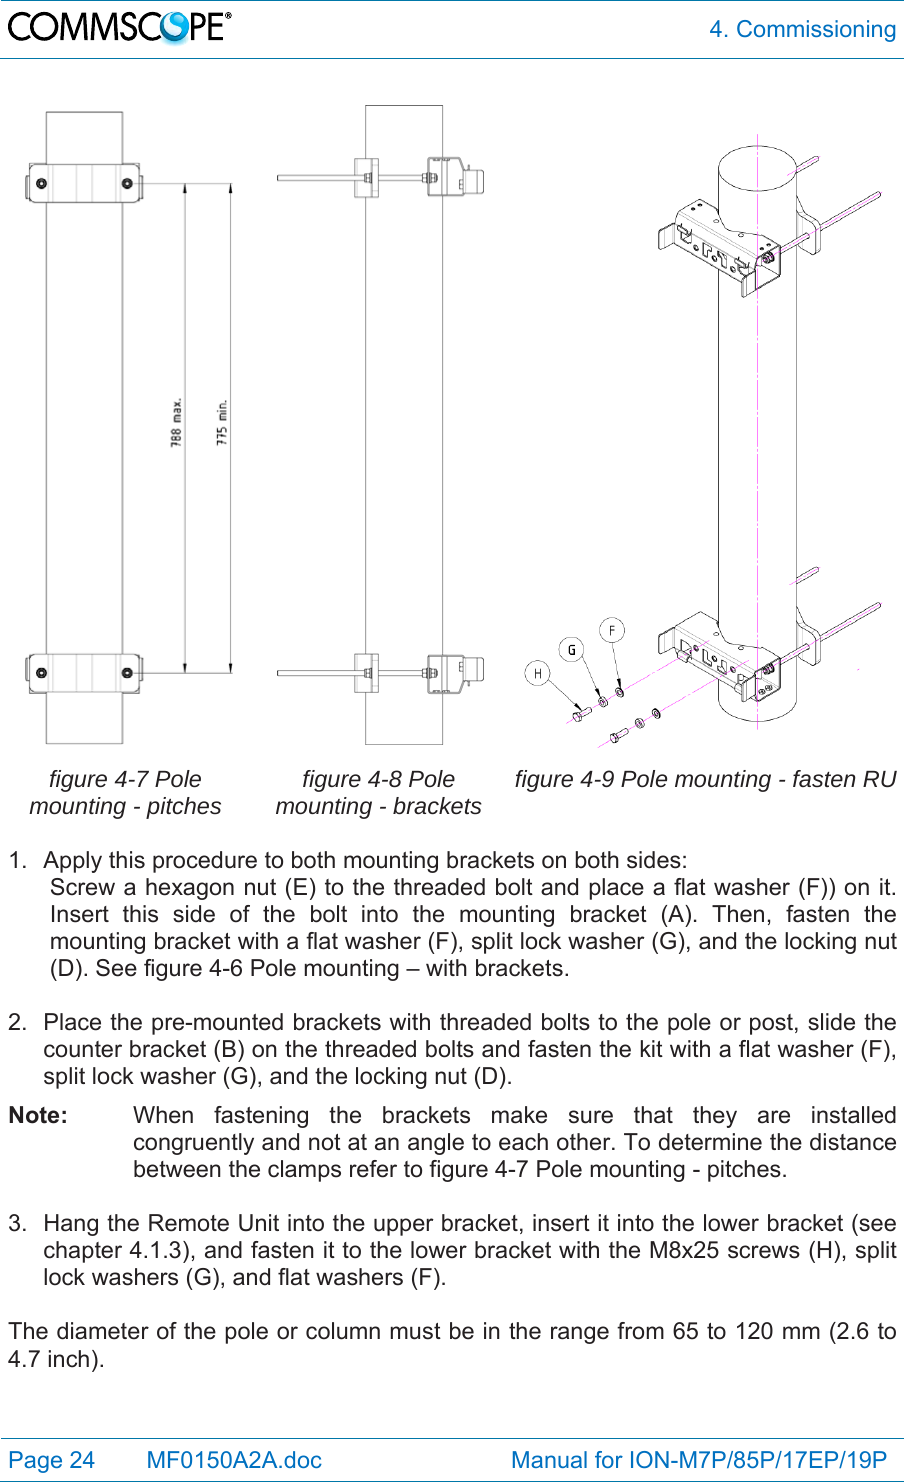  4. Commissioning Page 24   MF0150A2A.doc                             Manual for ION-M7P/85P/17EP/19P    figure 4-7 Pole mounting - pitches  figure 4-8 Pole mounting - brackets  figure 4-9 Pole mounting - fasten RU 1.  Apply this procedure to both mounting brackets on both sides: Screw a hexagon nut (E) to the threaded bolt and place a flat washer (F)) on it. Insert this side of the bolt into the mounting bracket (A). Then, fasten the mounting bracket with a flat washer (F), split lock washer (G), and the locking nut (D). See figure 4-6 Pole mounting – with brackets.  2.  Place the pre-mounted brackets with threaded bolts to the pole or post, slide the counter bracket (B) on the threaded bolts and fasten the kit with a flat washer (F), split lock washer (G), and the locking nut (D). Note:  When fastening the brackets make sure that they are installed congruently and not at an angle to each other. To determine the distance between the clamps refer to figure 4-7 Pole mounting - pitches.  3.  Hang the Remote Unit into the upper bracket, insert it into the lower bracket (see chapter 4.1.3), and fasten it to the lower bracket with the M8x25 screws (H), split lock washers (G), and flat washers (F).  The diameter of the pole or column must be in the range from 65 to 120 mm (2.6 to 4.7 inch). 